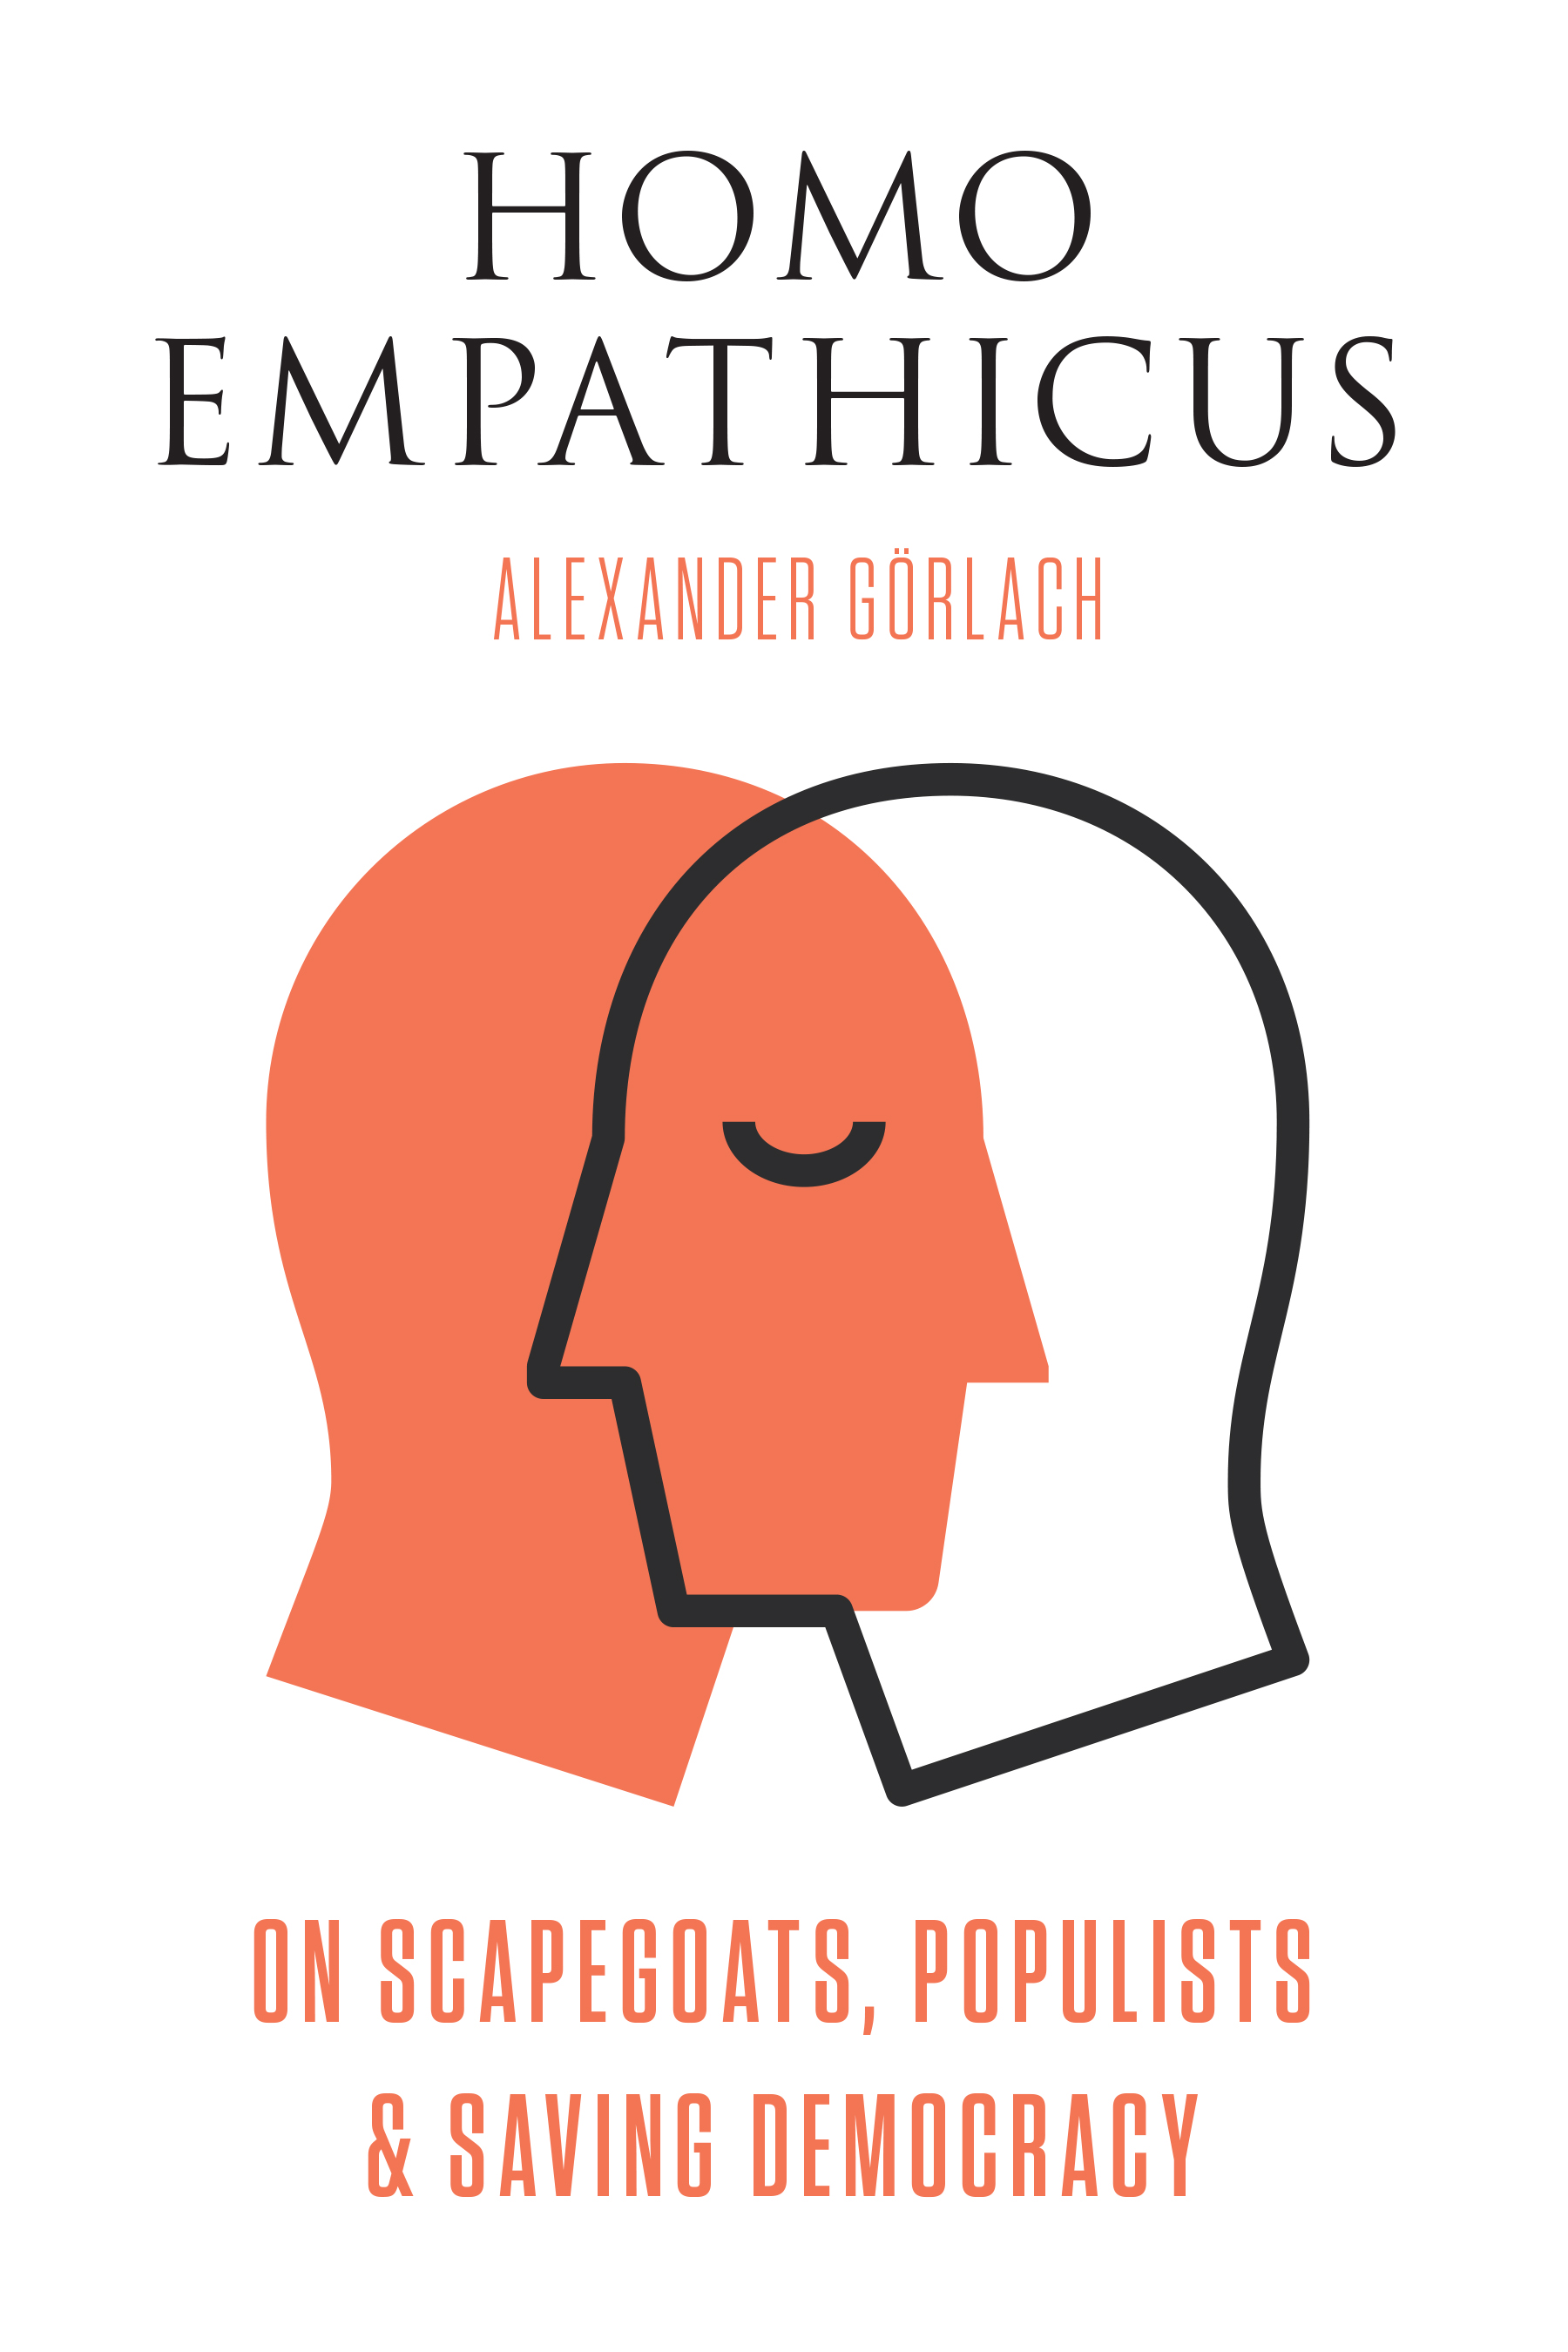 Homo Empathicus: On Scapegoats, Populists, and Saving Democracy